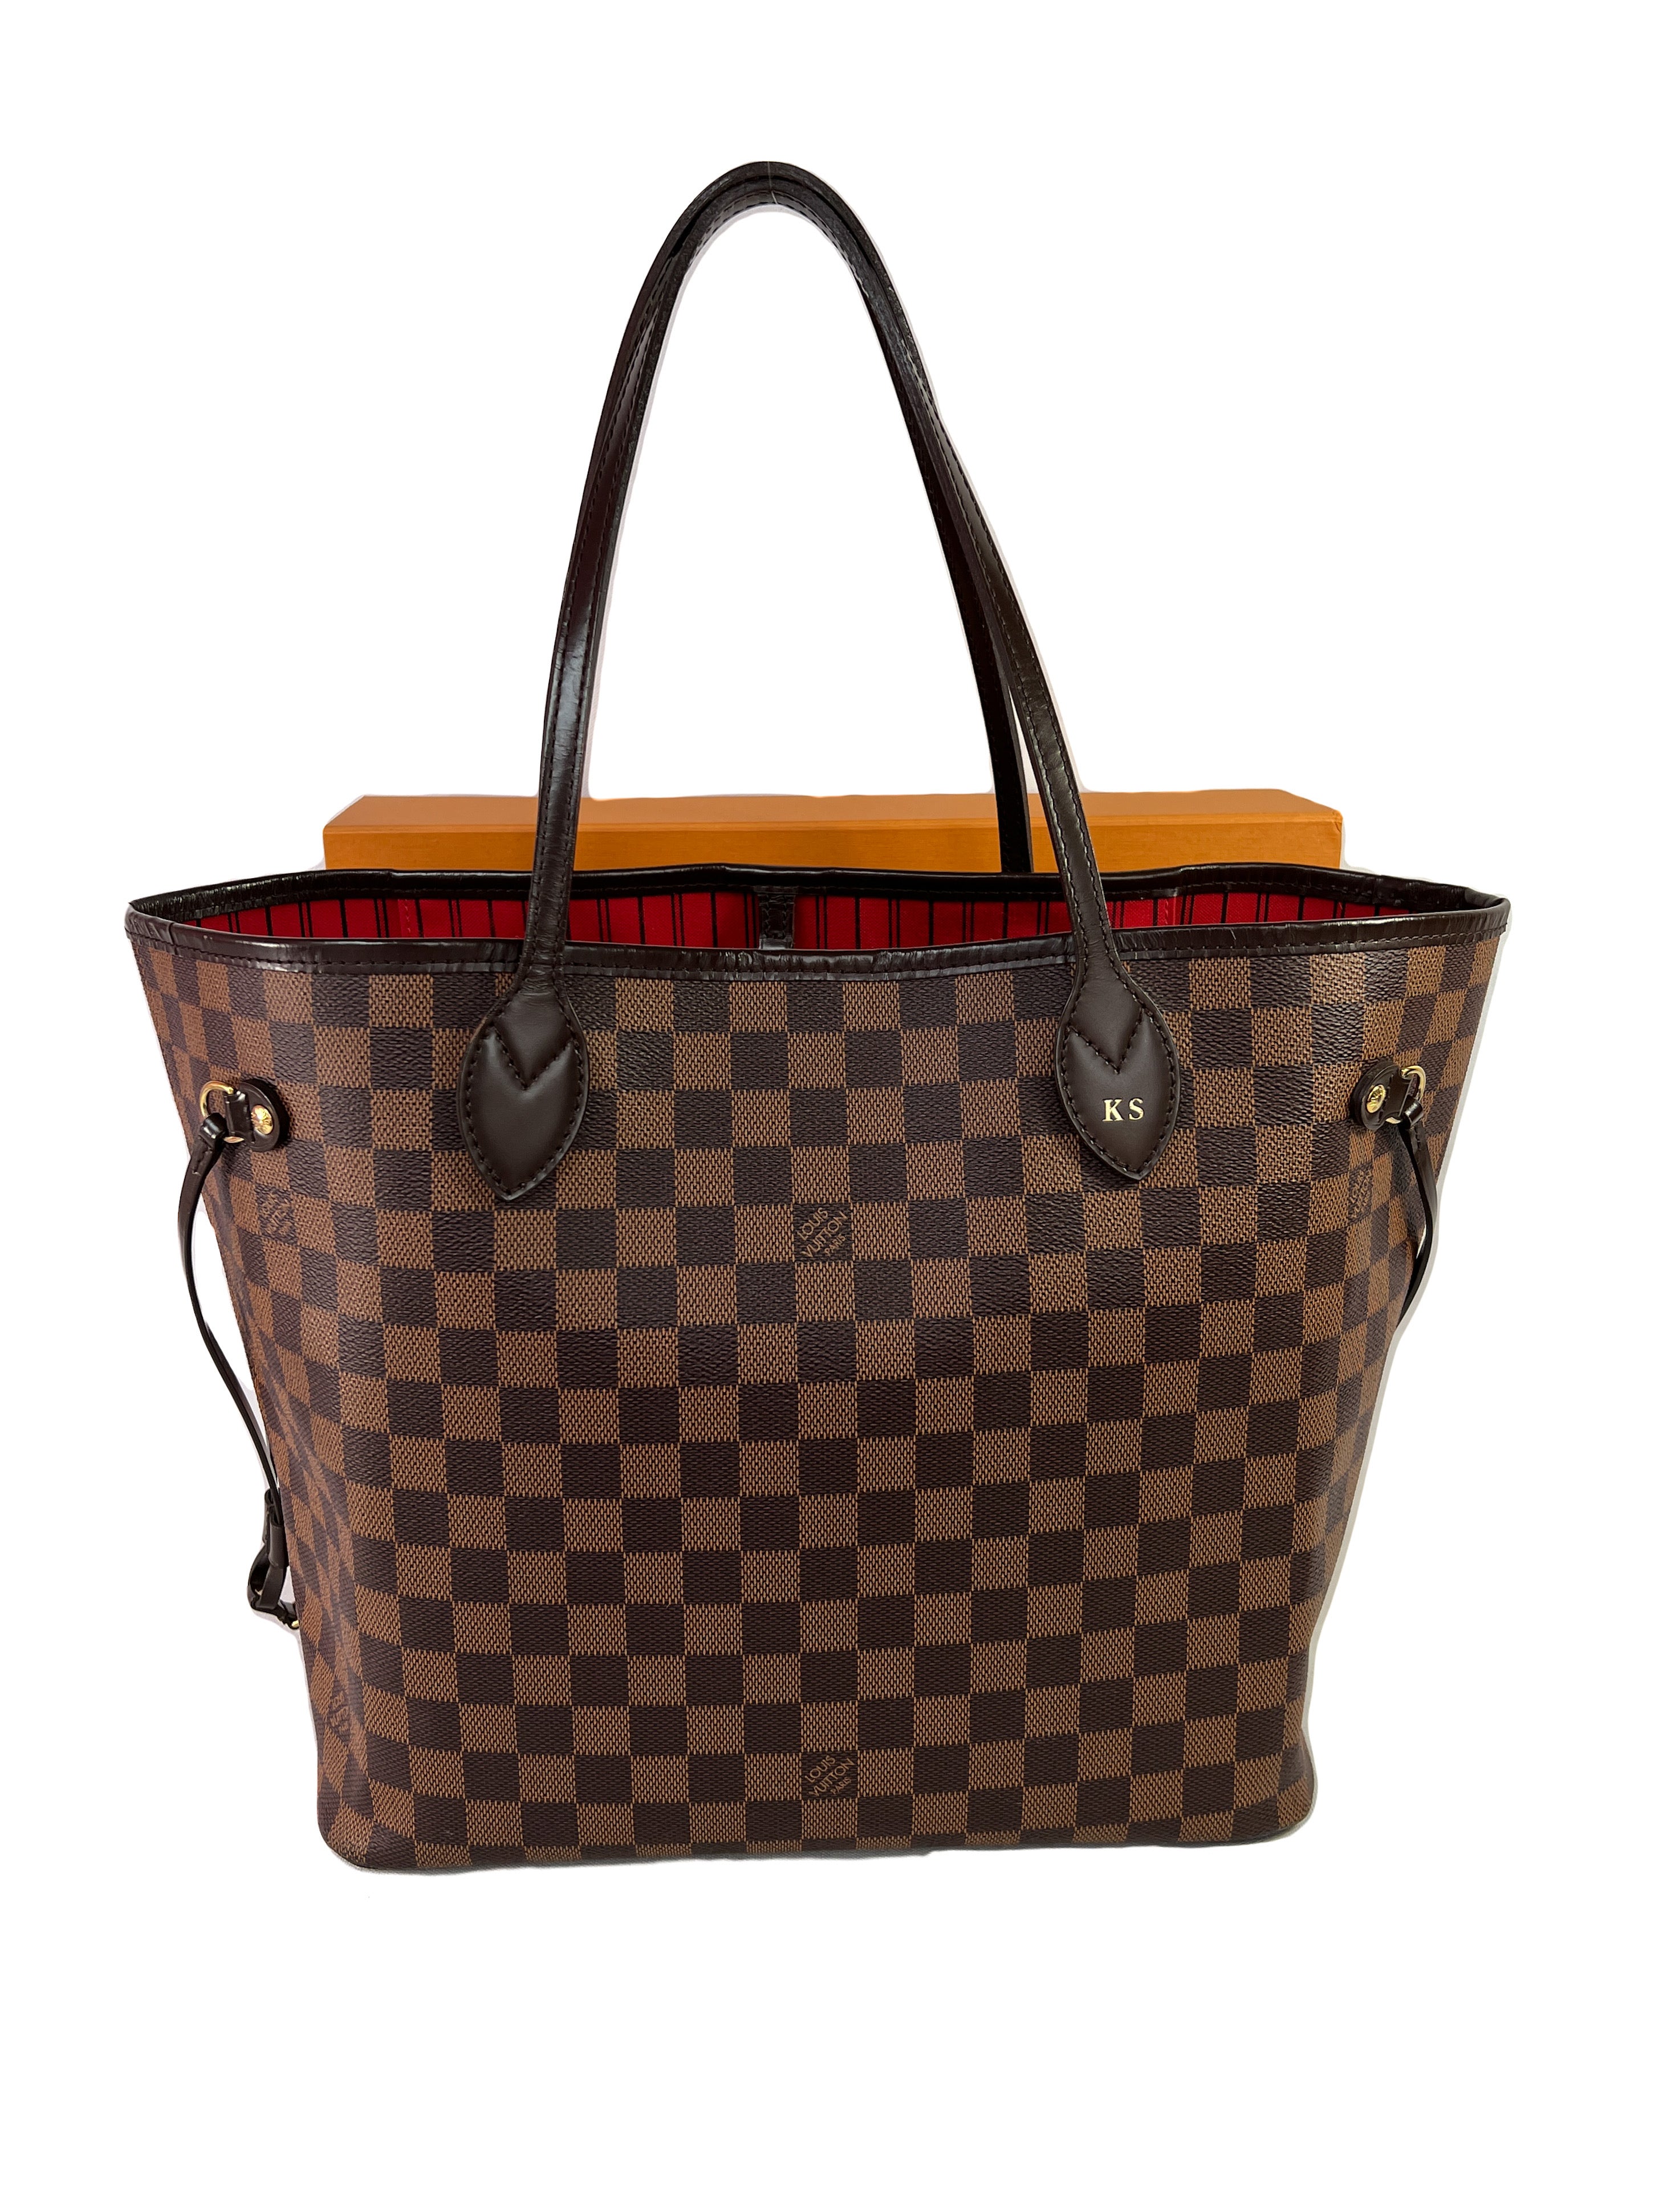 Louis Vuitton Neverfull MM Damier Ebene With Cherry Lining